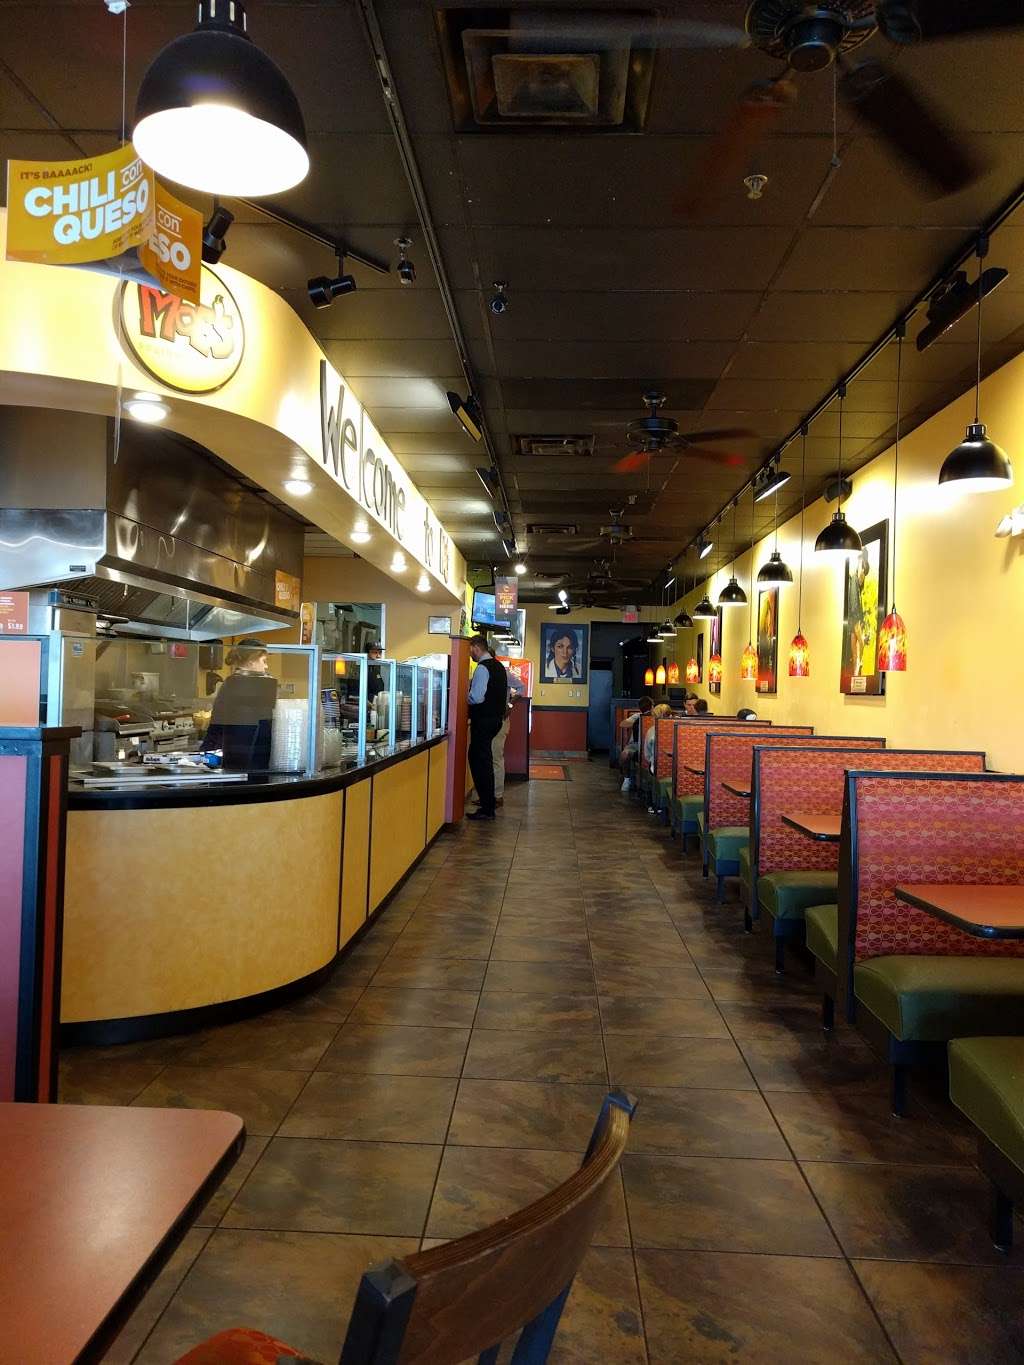 Moes Southwest Grill | 12701 Narcoossee Rd, Orlando, FL 32832 | Phone: (407) 203-5178